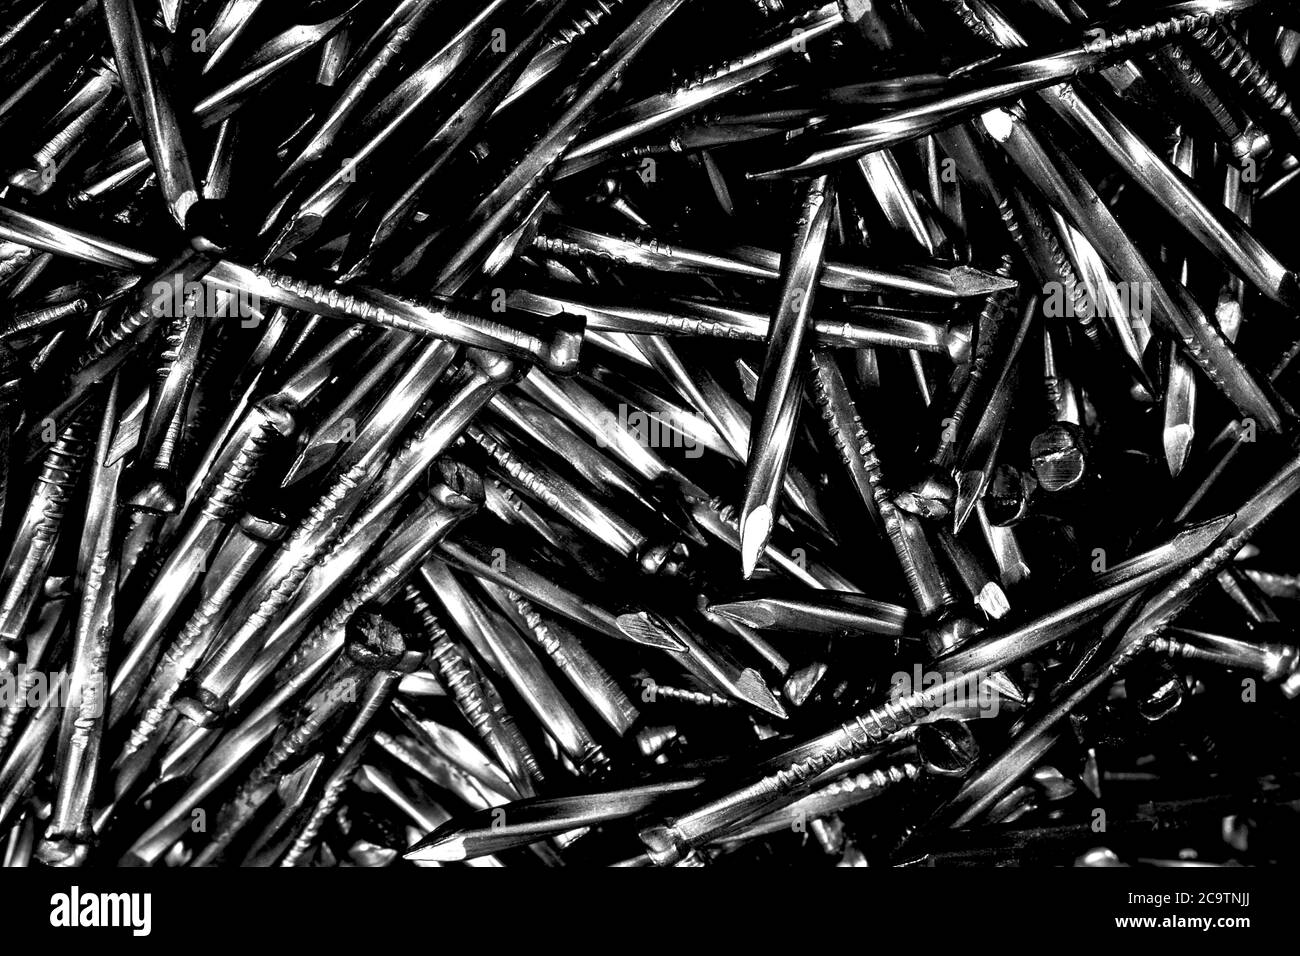 Pile of twisted steel nails Stock Photo